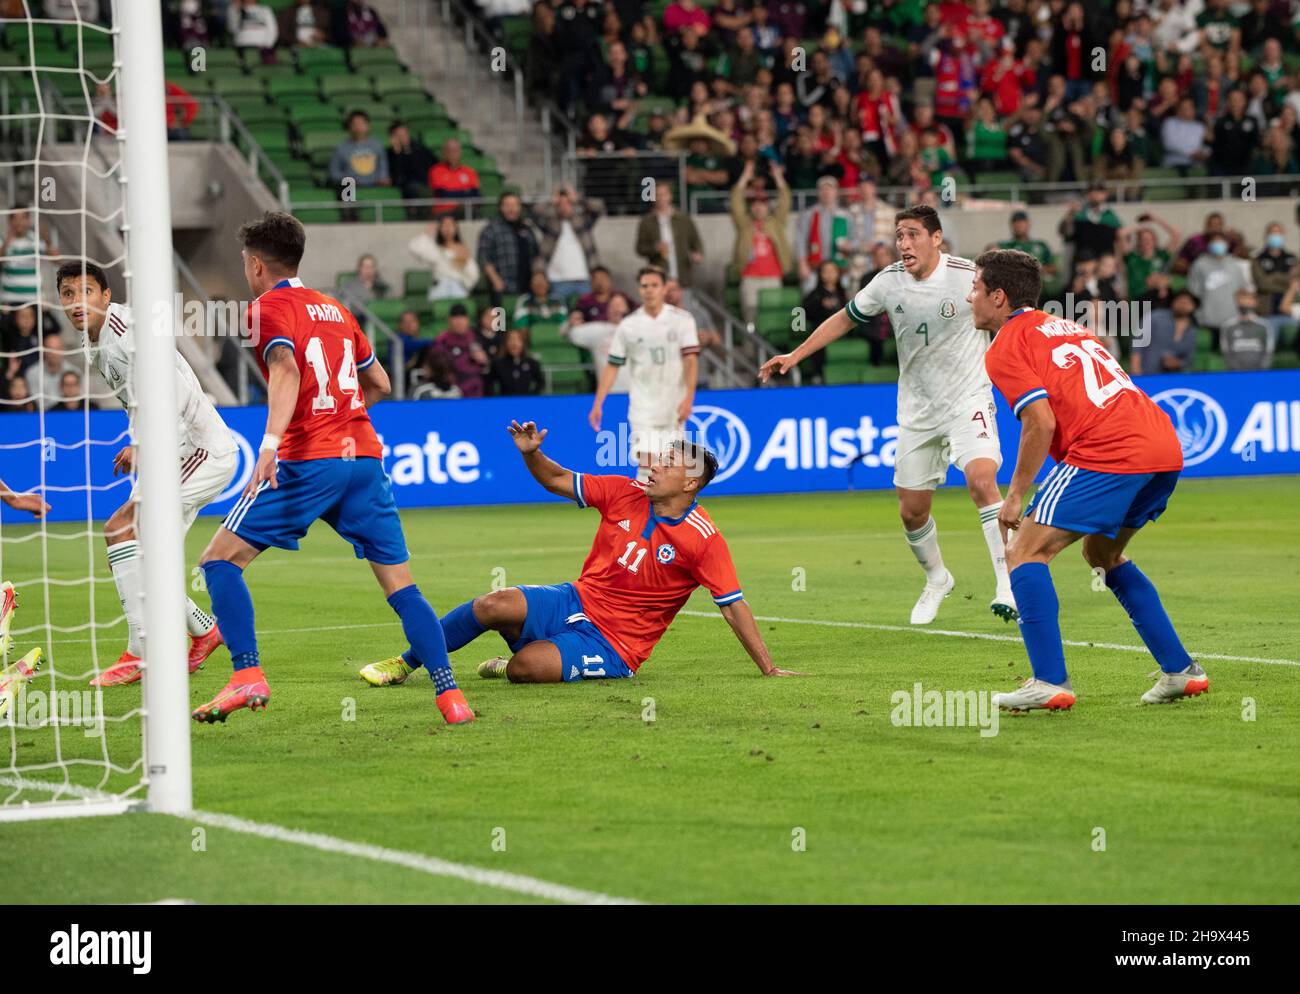 Austin, TX, USA. 8th Dec, 2021. Chile's IVAN MORALES reacts as he scores a goal in the first half of a Mexico National Team vs. Chile friendly at Austin's Q2 Stadium. The teams were tied, 2-2 after regulation play. Mexico's #4 LUIS SALCEDO watches the action with Chile's #28 CLEMENTE MONTES. (Credit Image: © Bob Daemmrich/ZUMA Press Wire) Stock Photo